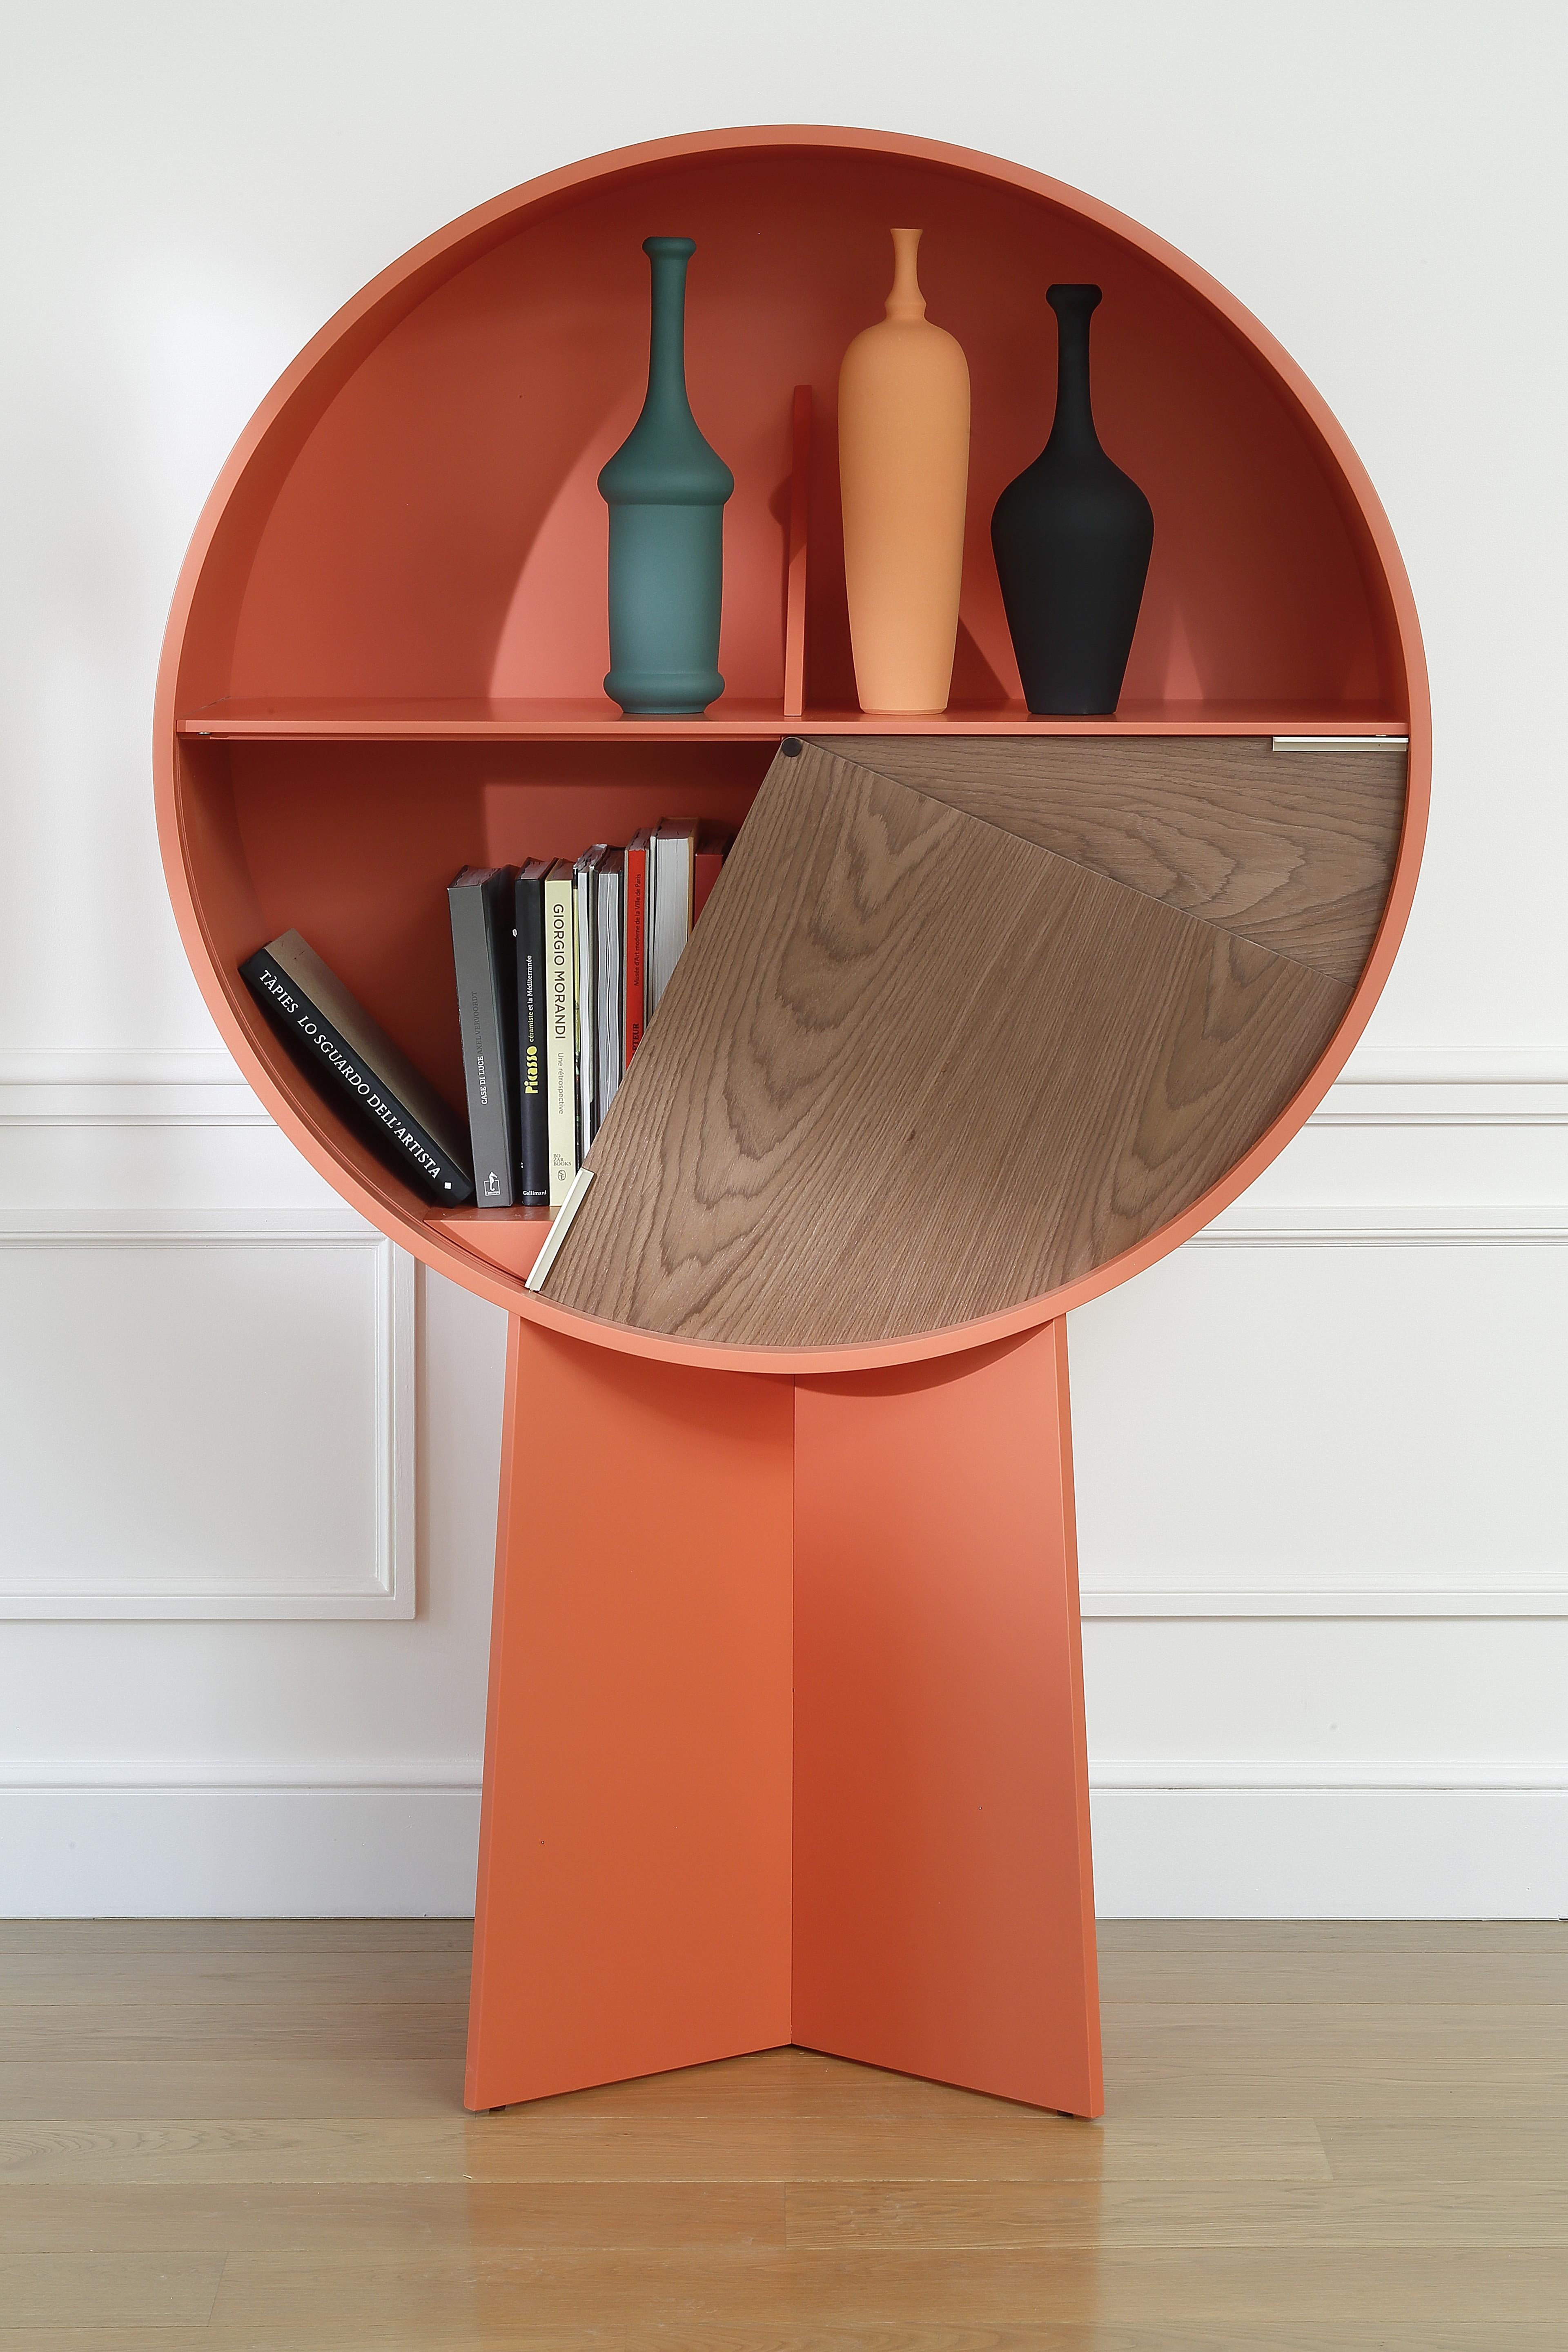 Orange luna storage cabinet by Patricia Urquiola
Materials: Walnut veneer on medium, or orange lacquer on medium. 2 sliding doors in two-tone lacquered hemispheres or in varnished walnut veneer
Technique: Lacquered or natural wood. 
Dimensions: D 40